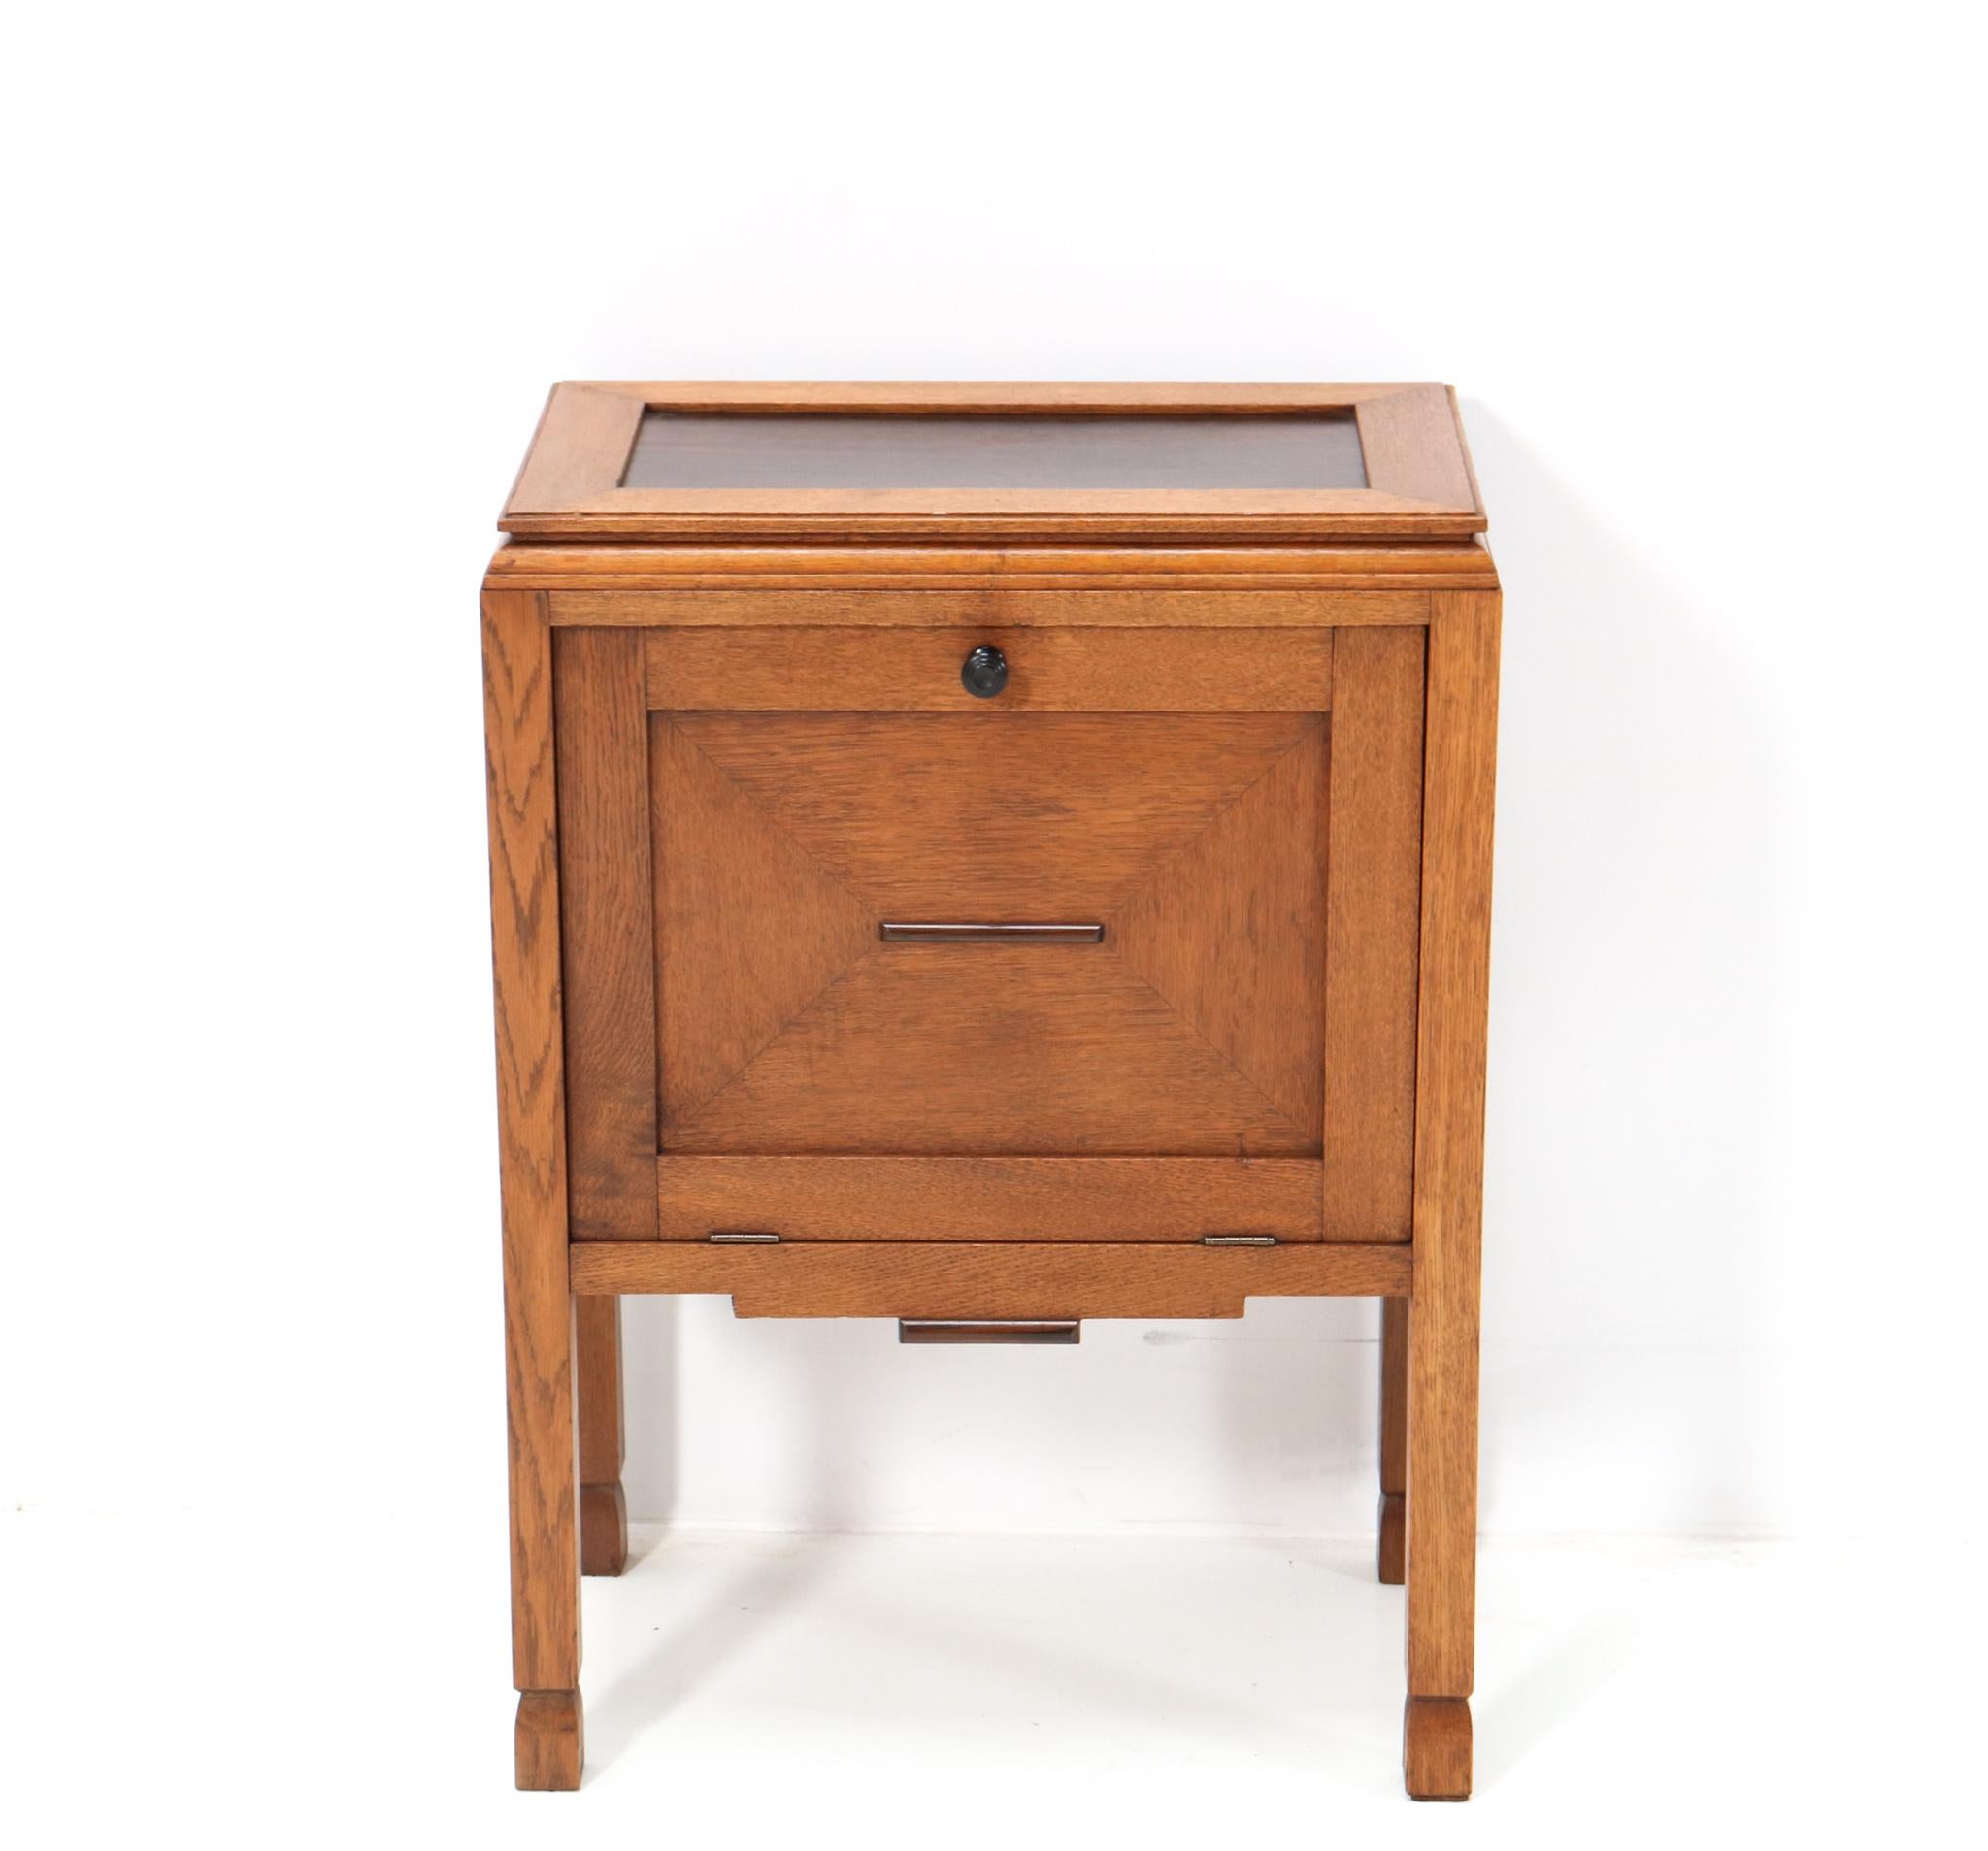 Magnificent and ultra rare Art Deco Amsterdamse School cabinet.
Striking Dutch design from the 1920s.
Solid oak with original oak veneer base with original macassar ebony knob and
elements.
The top is original and veneered with macassar ebony